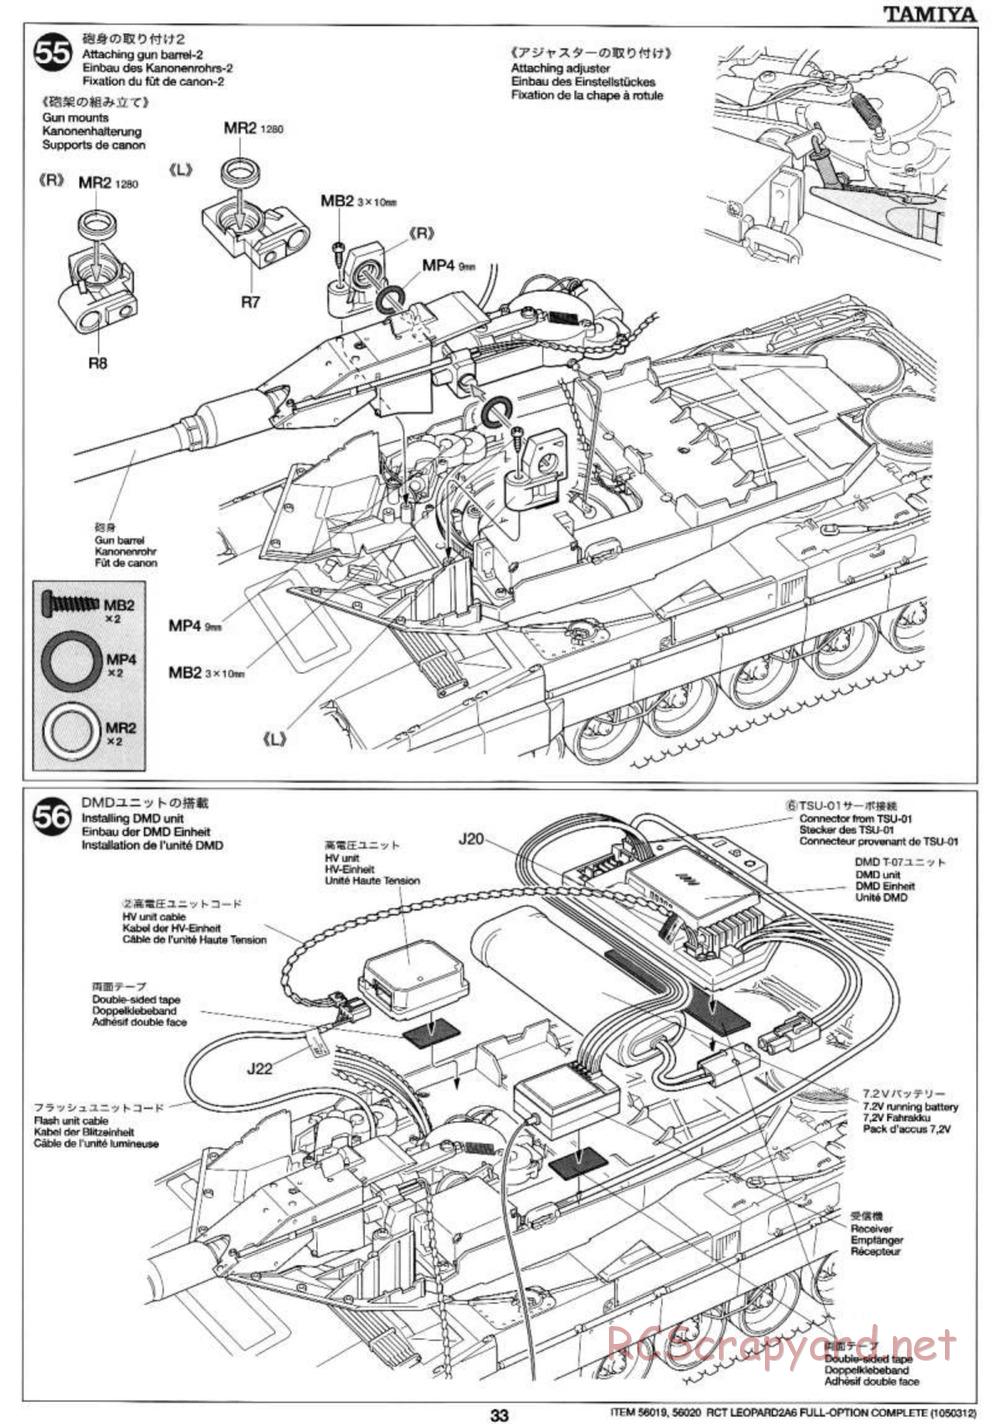 Tamiya - Leopard 2 A6 - 1/16 Scale Chassis - Manual - Page 33